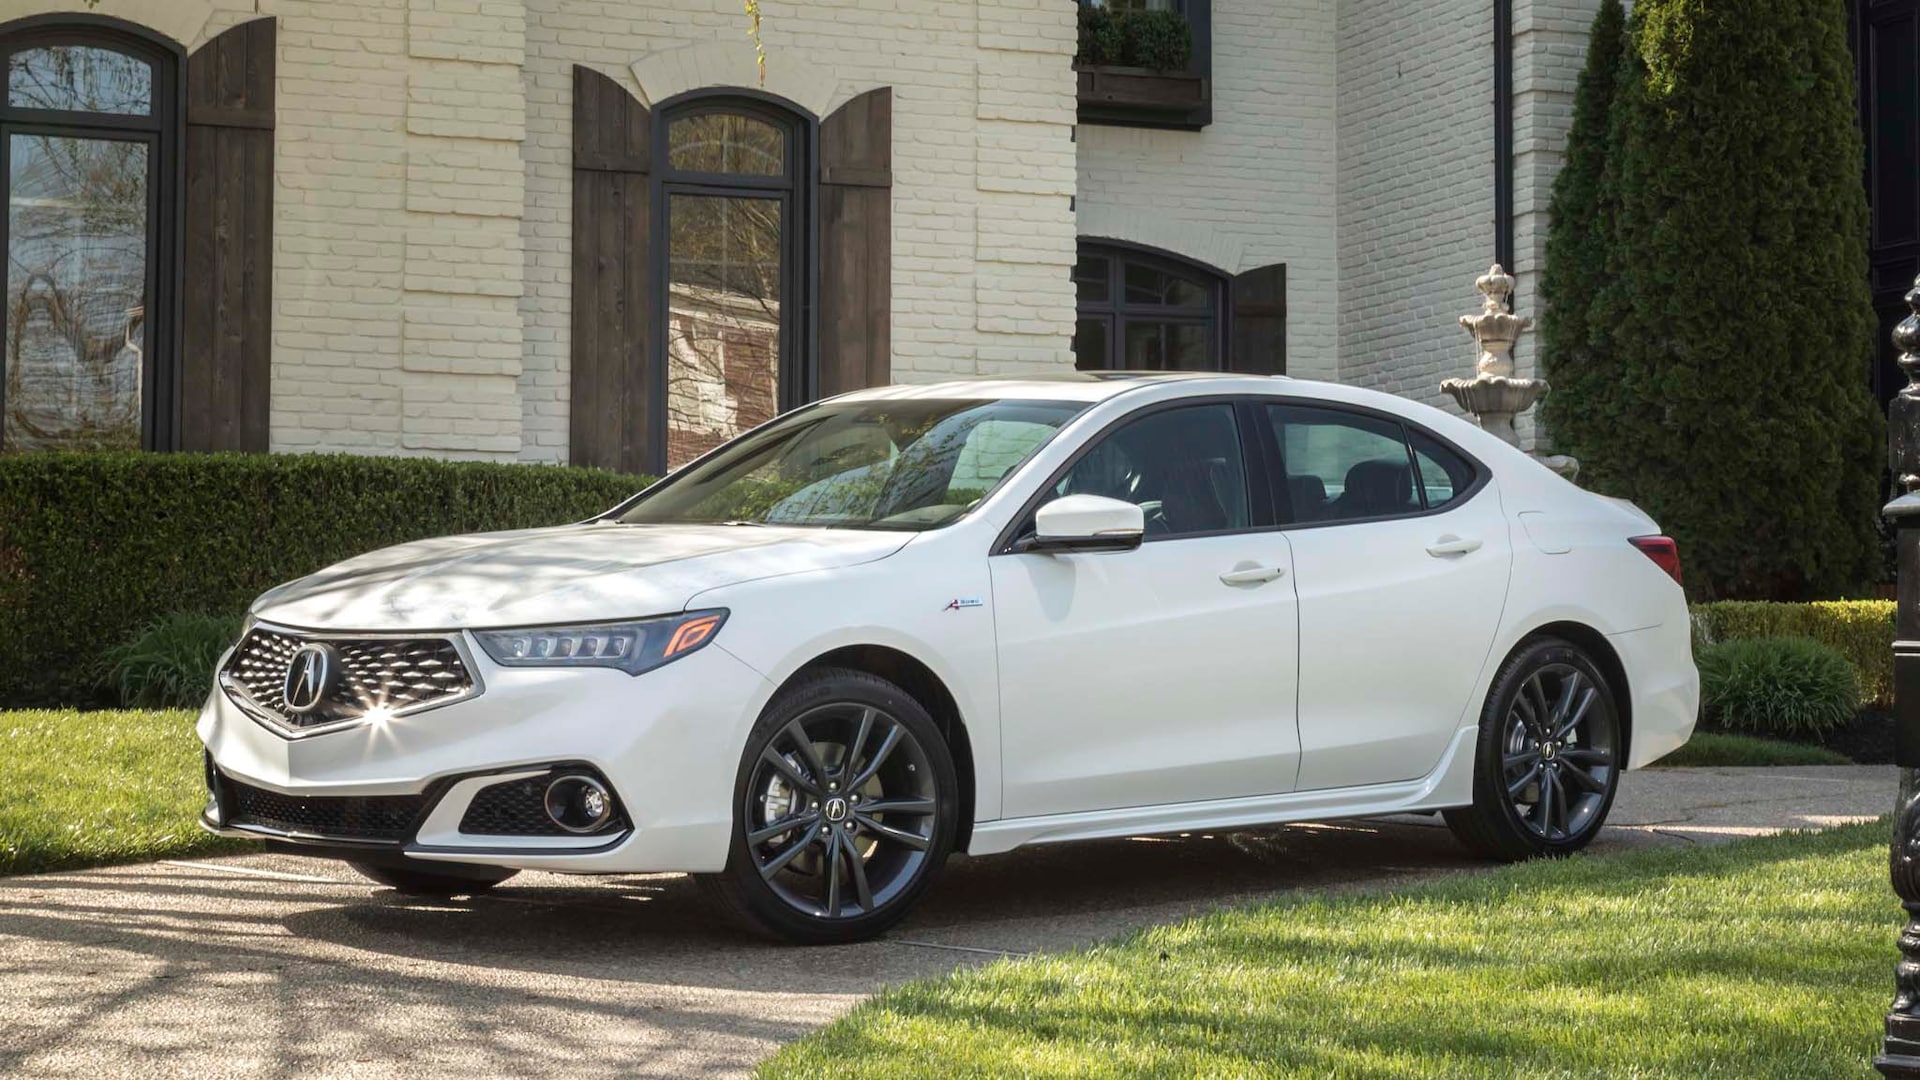 2020 Acura TLX Prices, Reviews, and Photos - MotorTrend